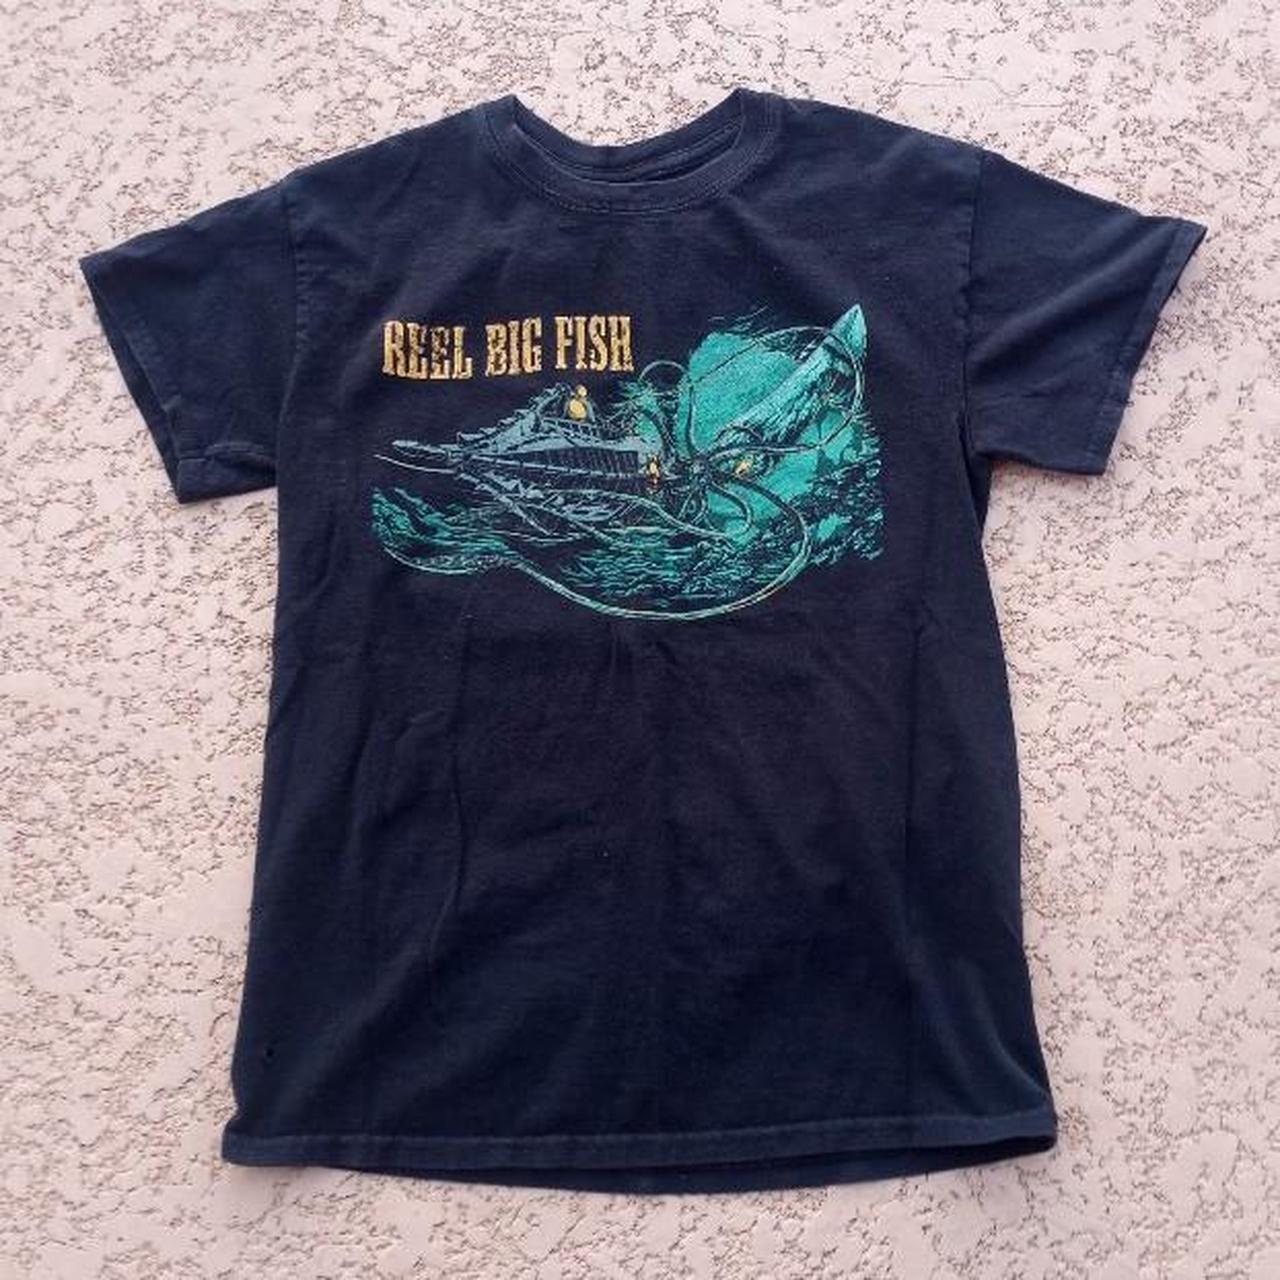 REEL BIG FISH TEE, This is a black, Size small, y2k